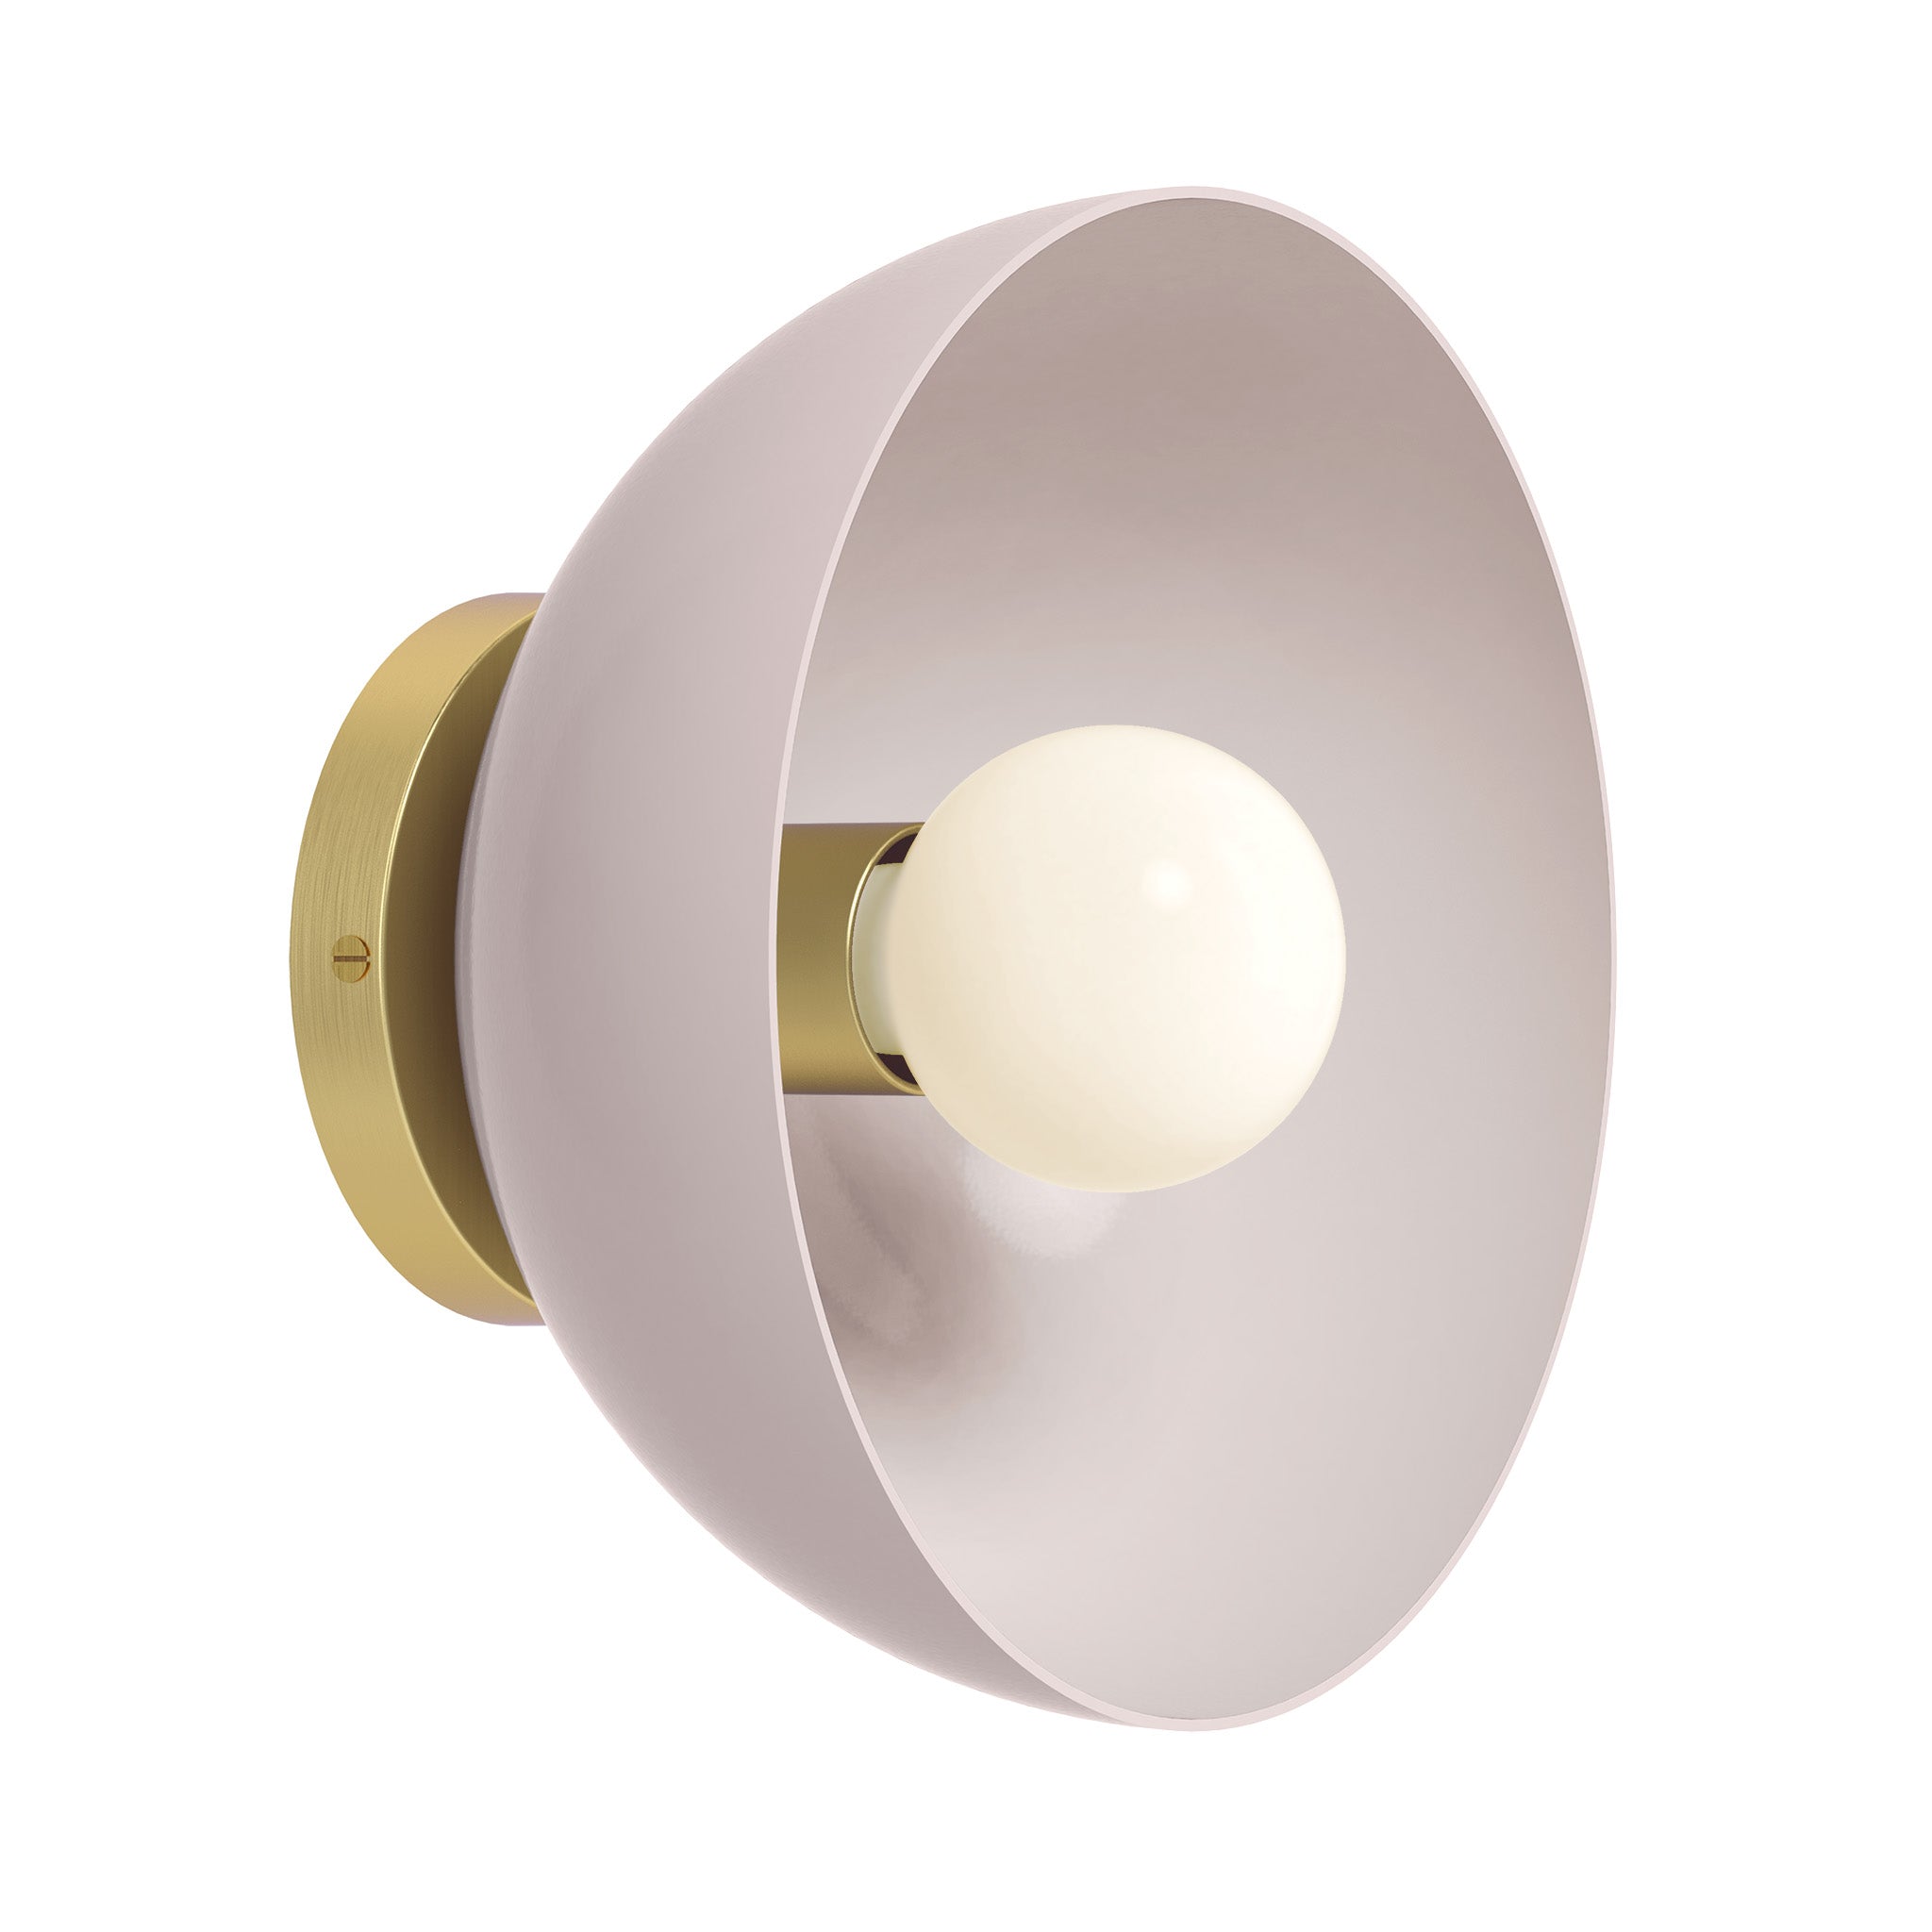 Brass and barely color hemi dome sconce 10" Dutton Brown lighting